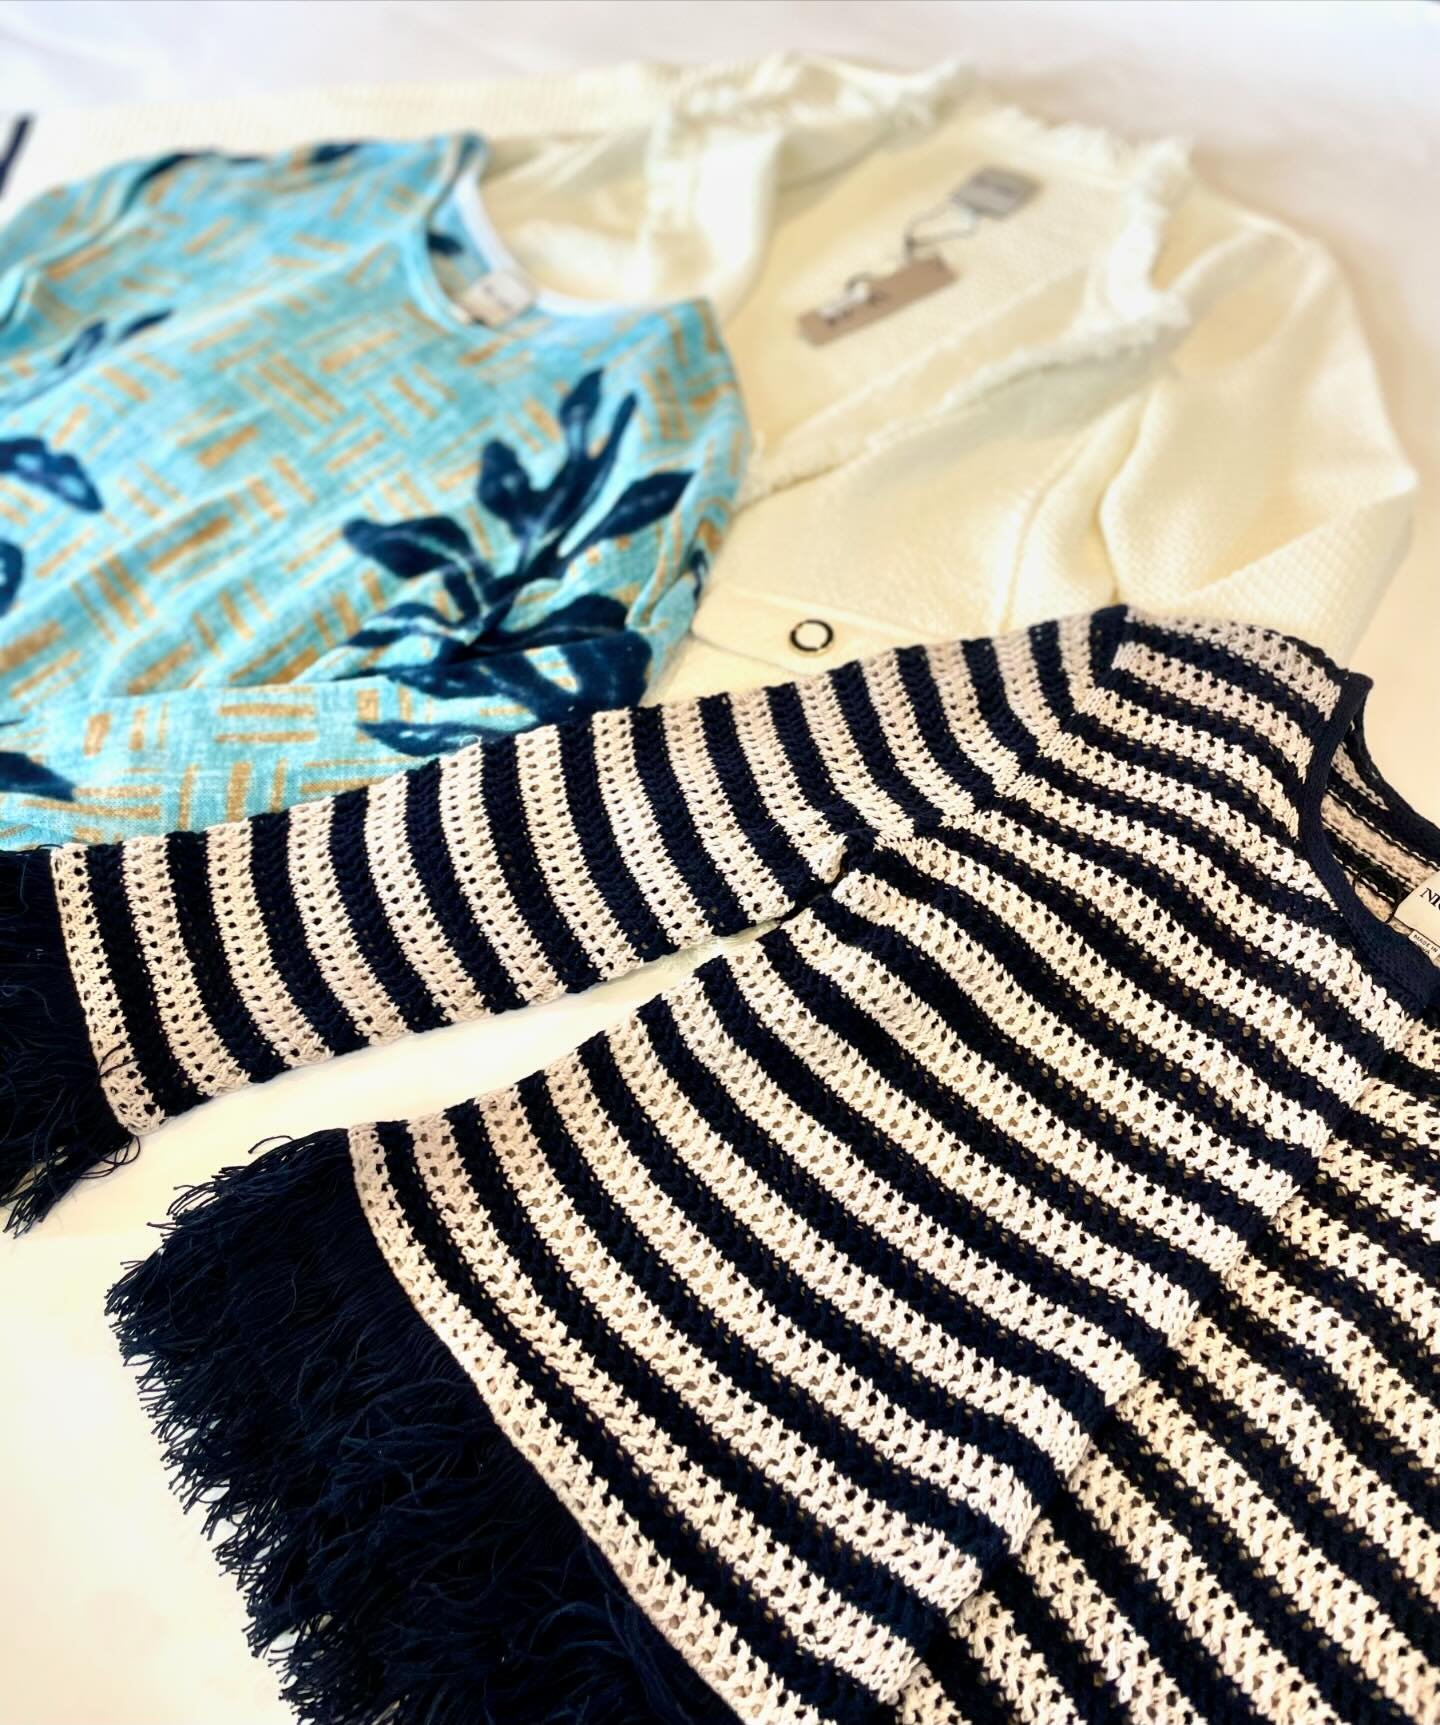 New spring sweaters from Nic+Zoe!